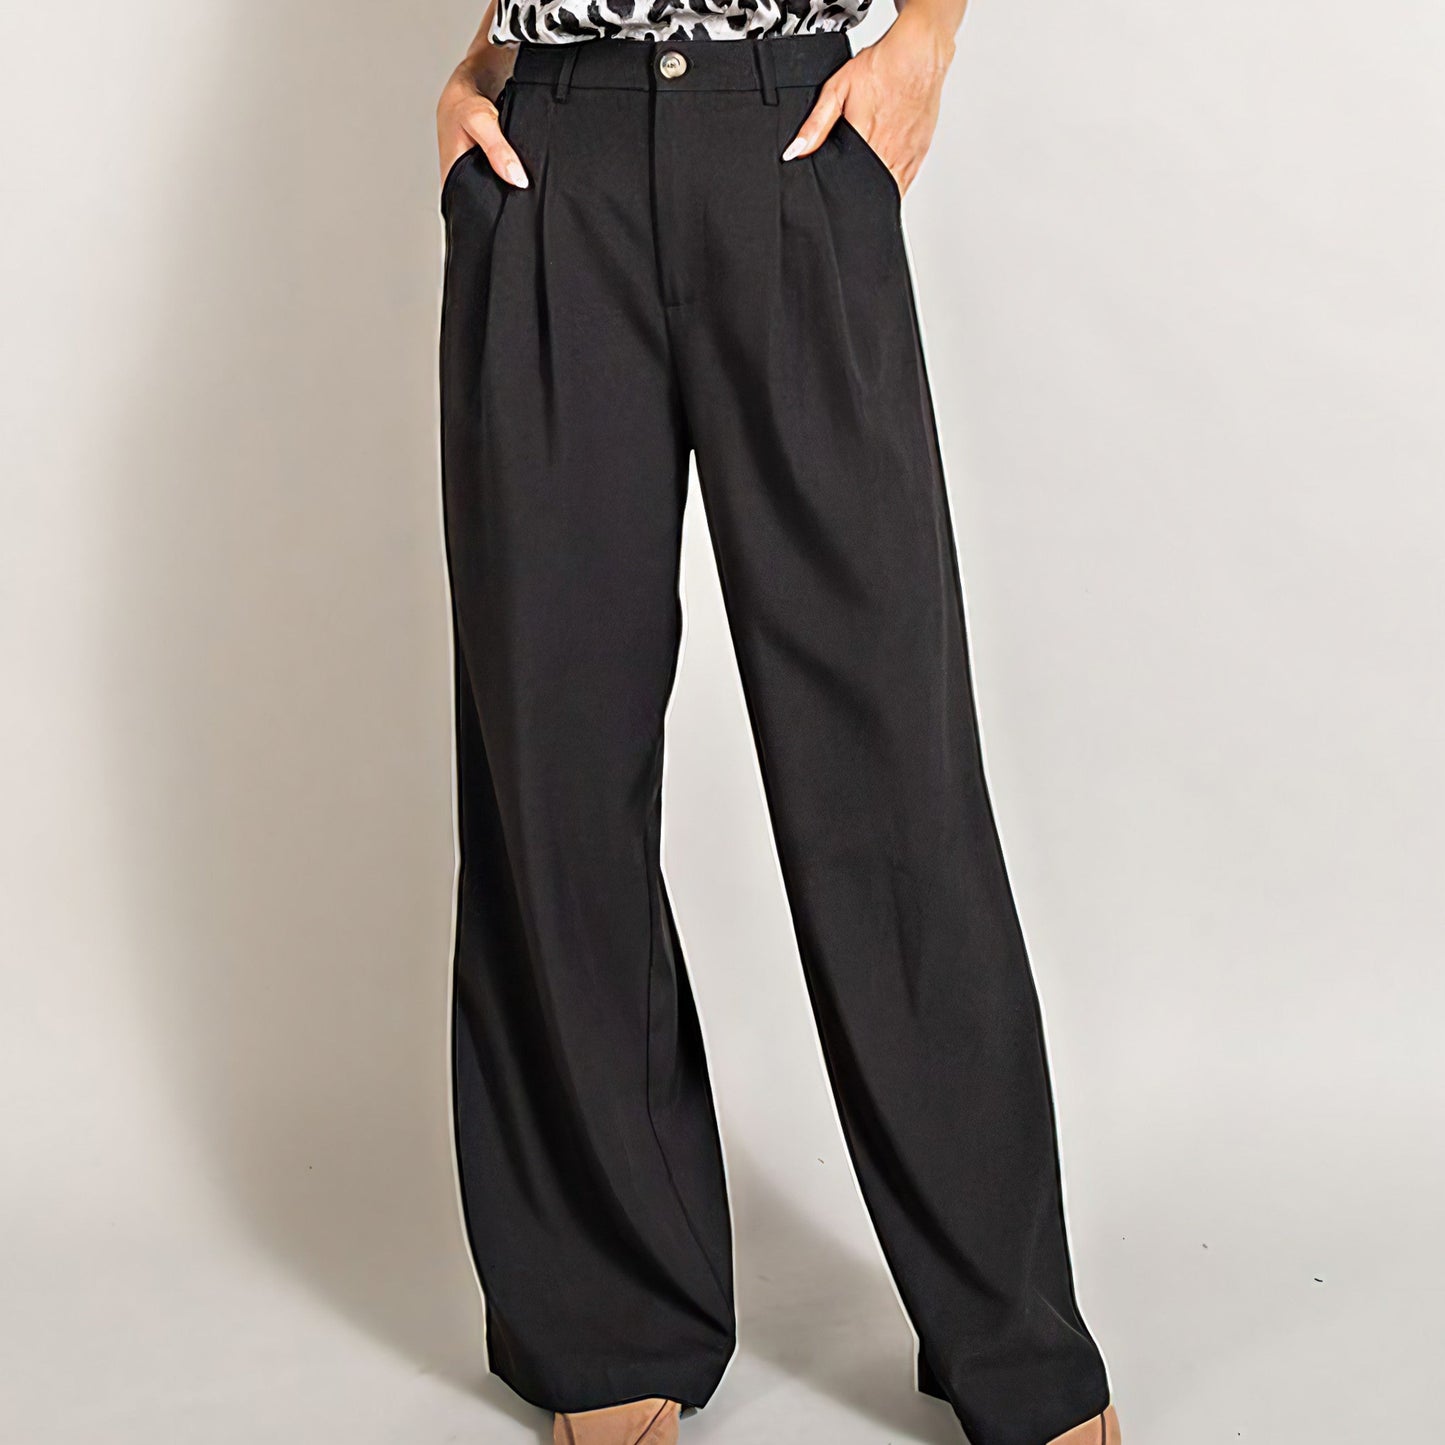 Flowy and Relaxed Straight Leg Pant